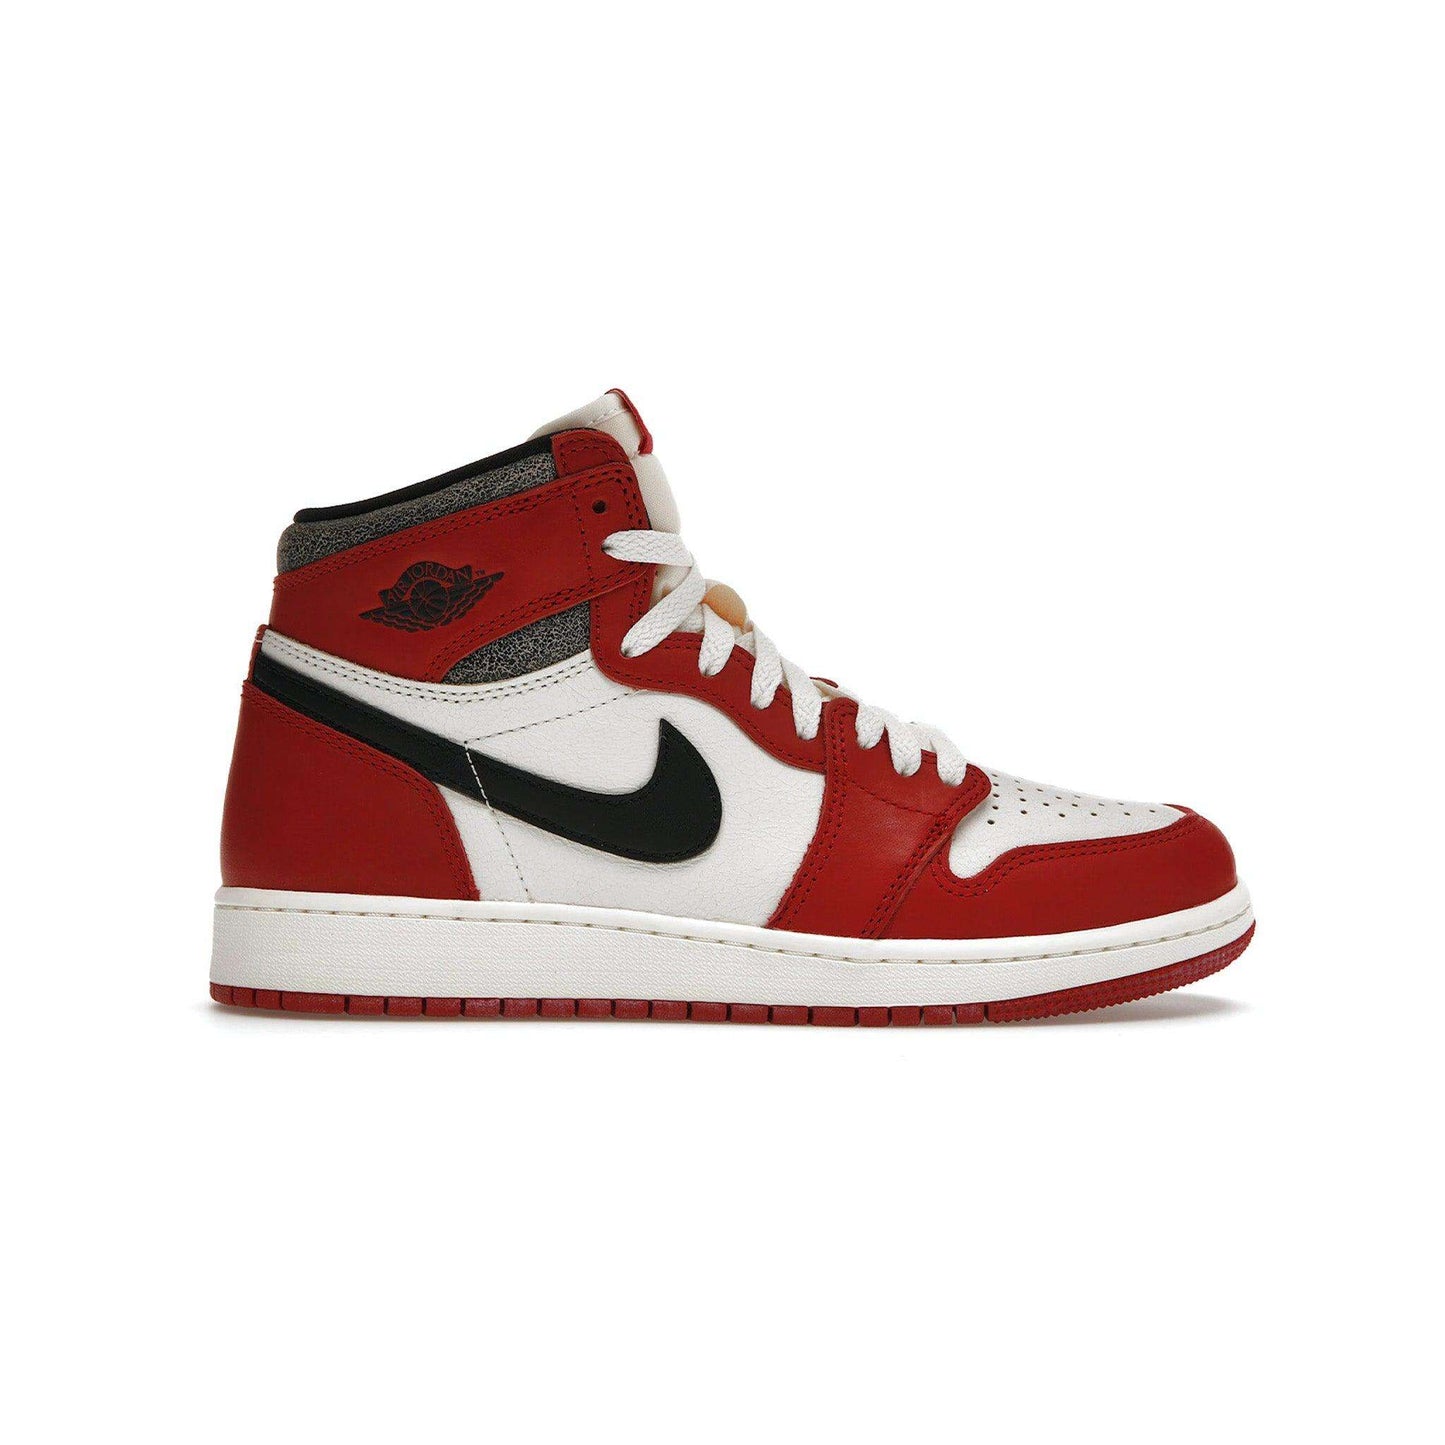 Jordan 1 Retro High OG Chicago Lost and Found (GS) (15)